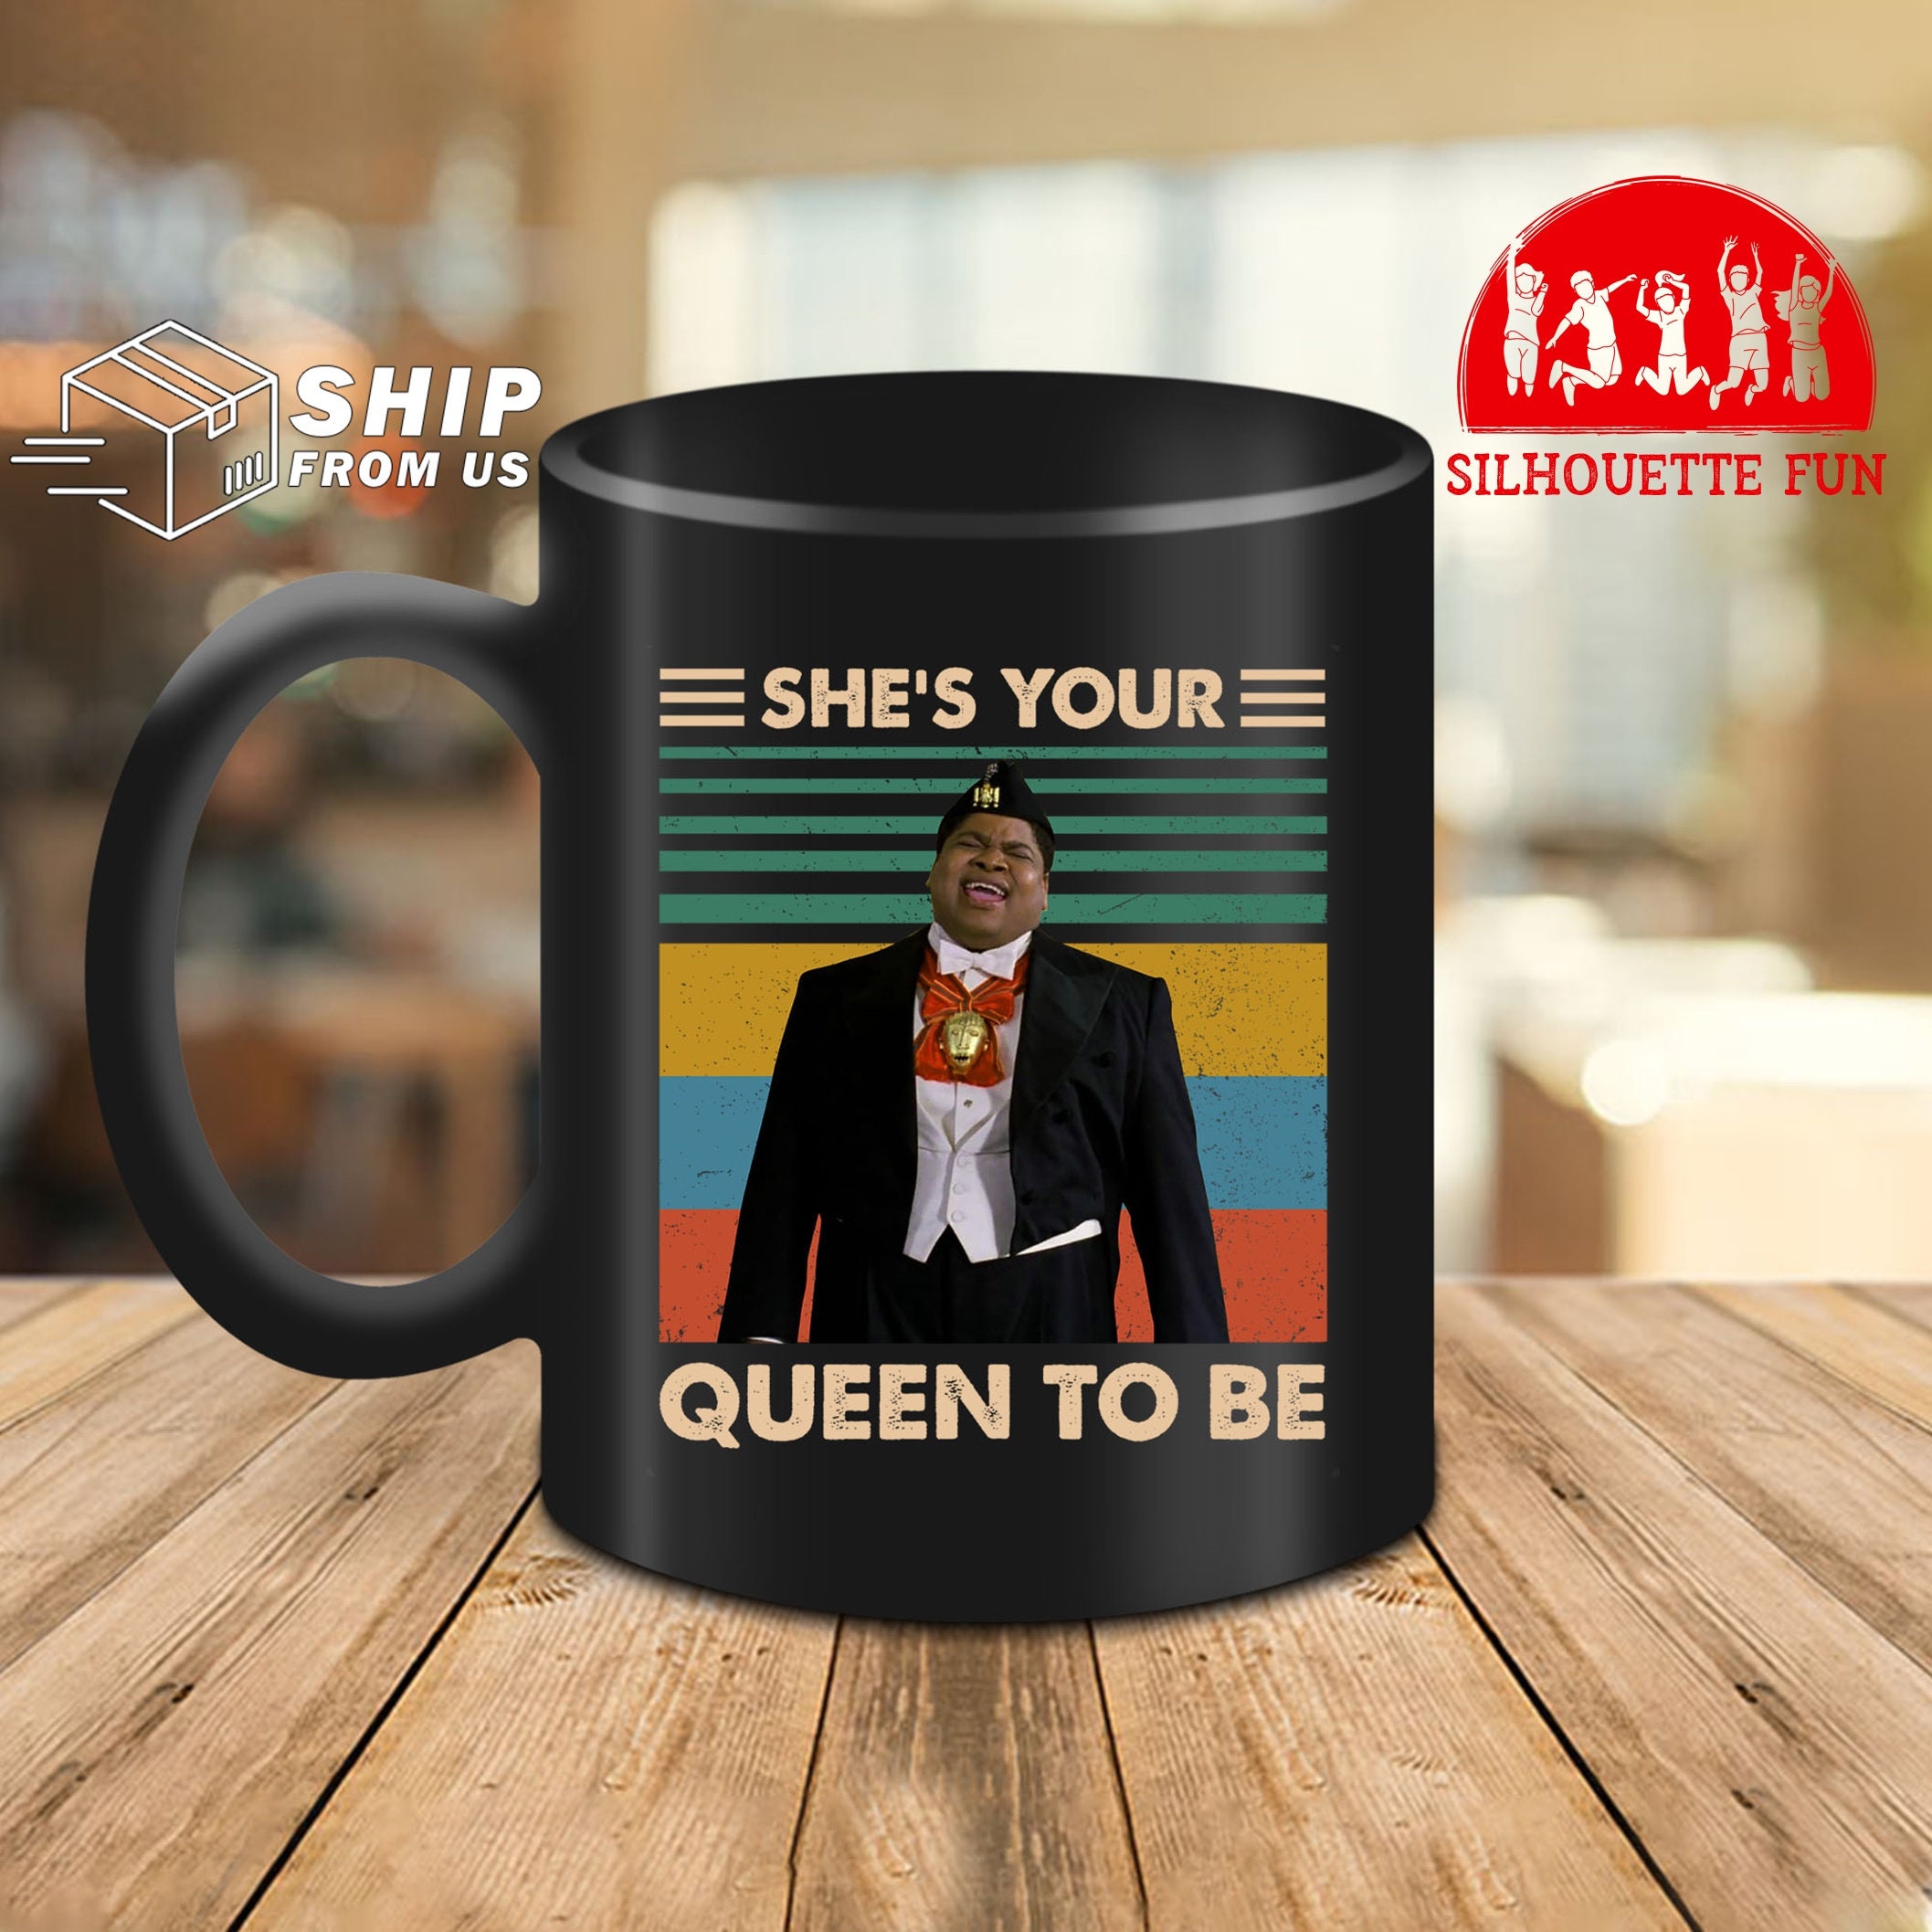 She's Your Queen to Be Vintage Ceramic Coffee Mug Oha - Etsy